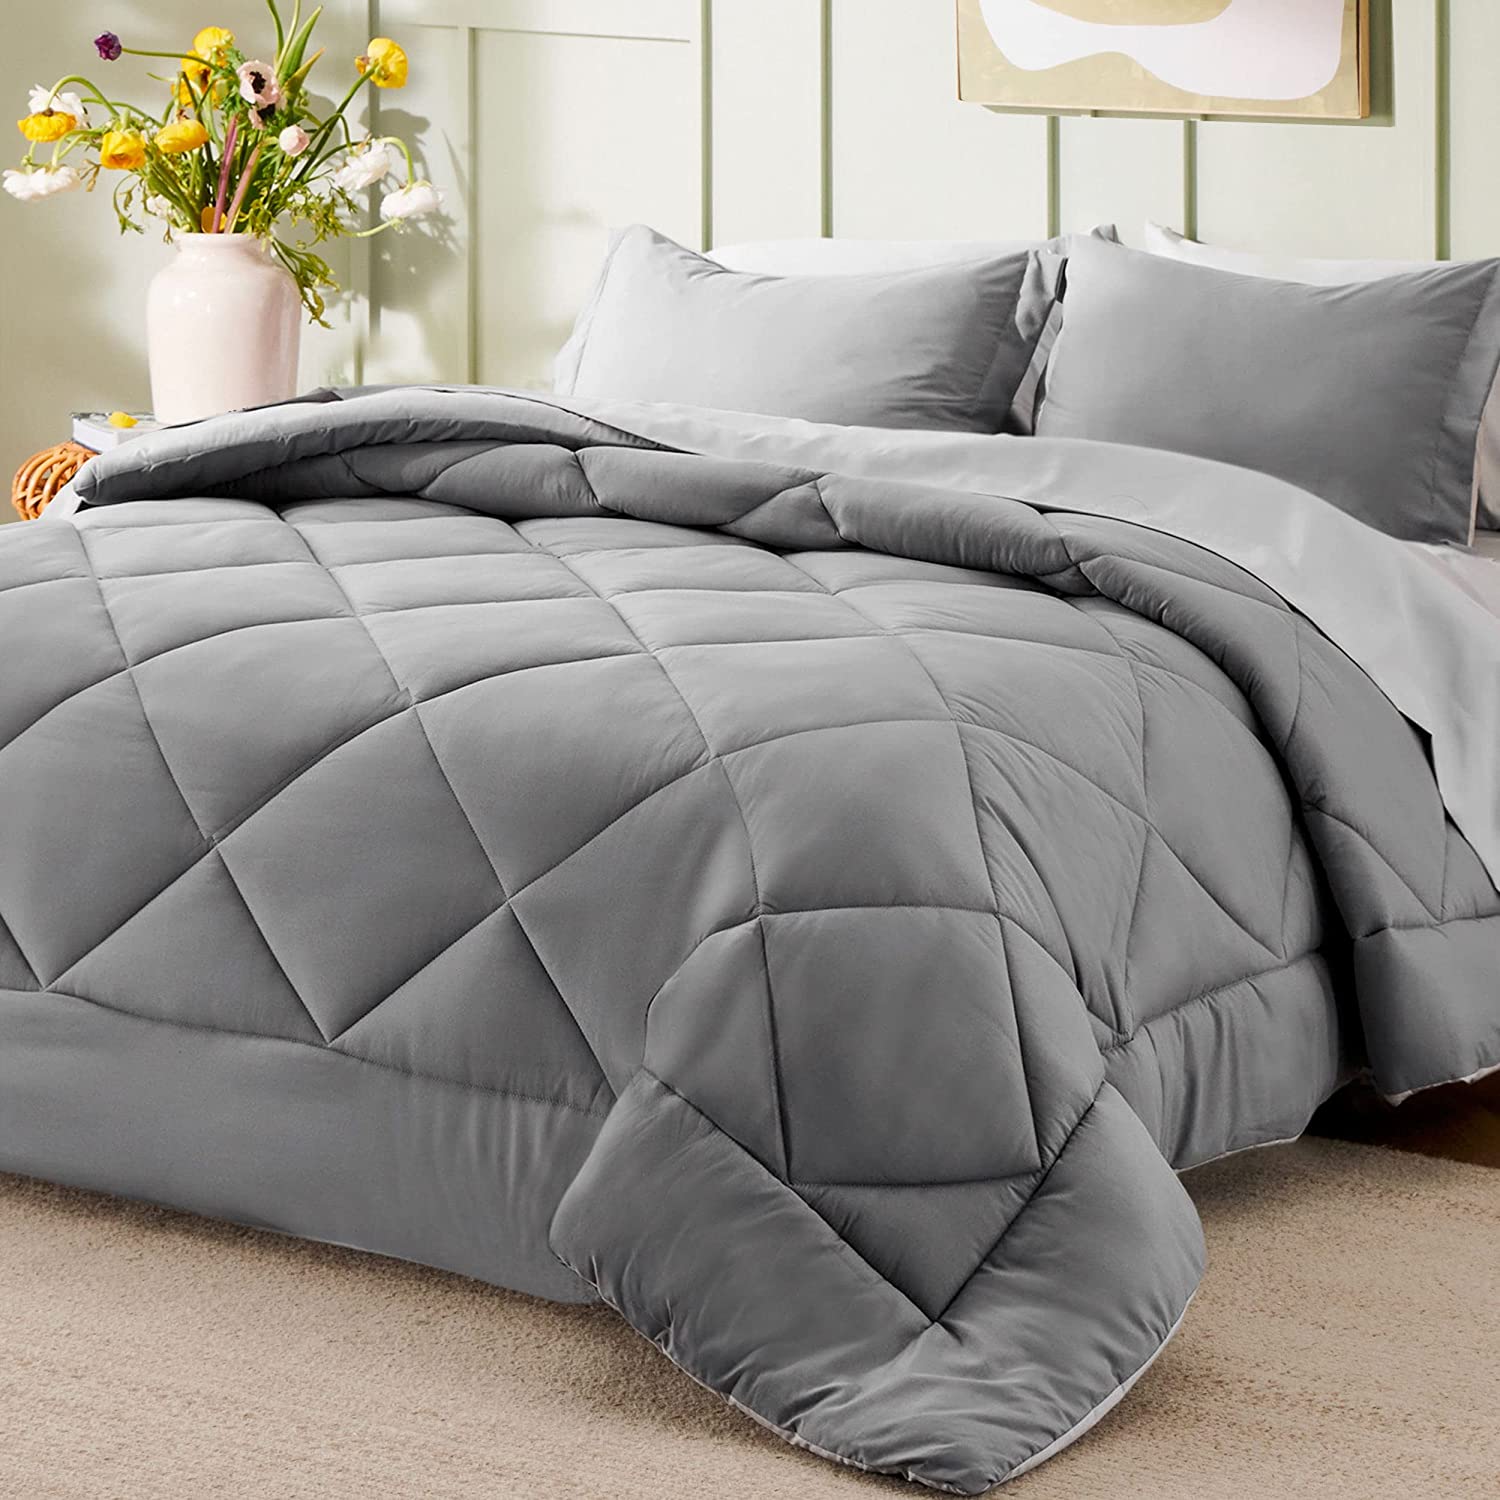 Bedsure Comforter Sets - Bed in A Bag with Comforter, Pillow